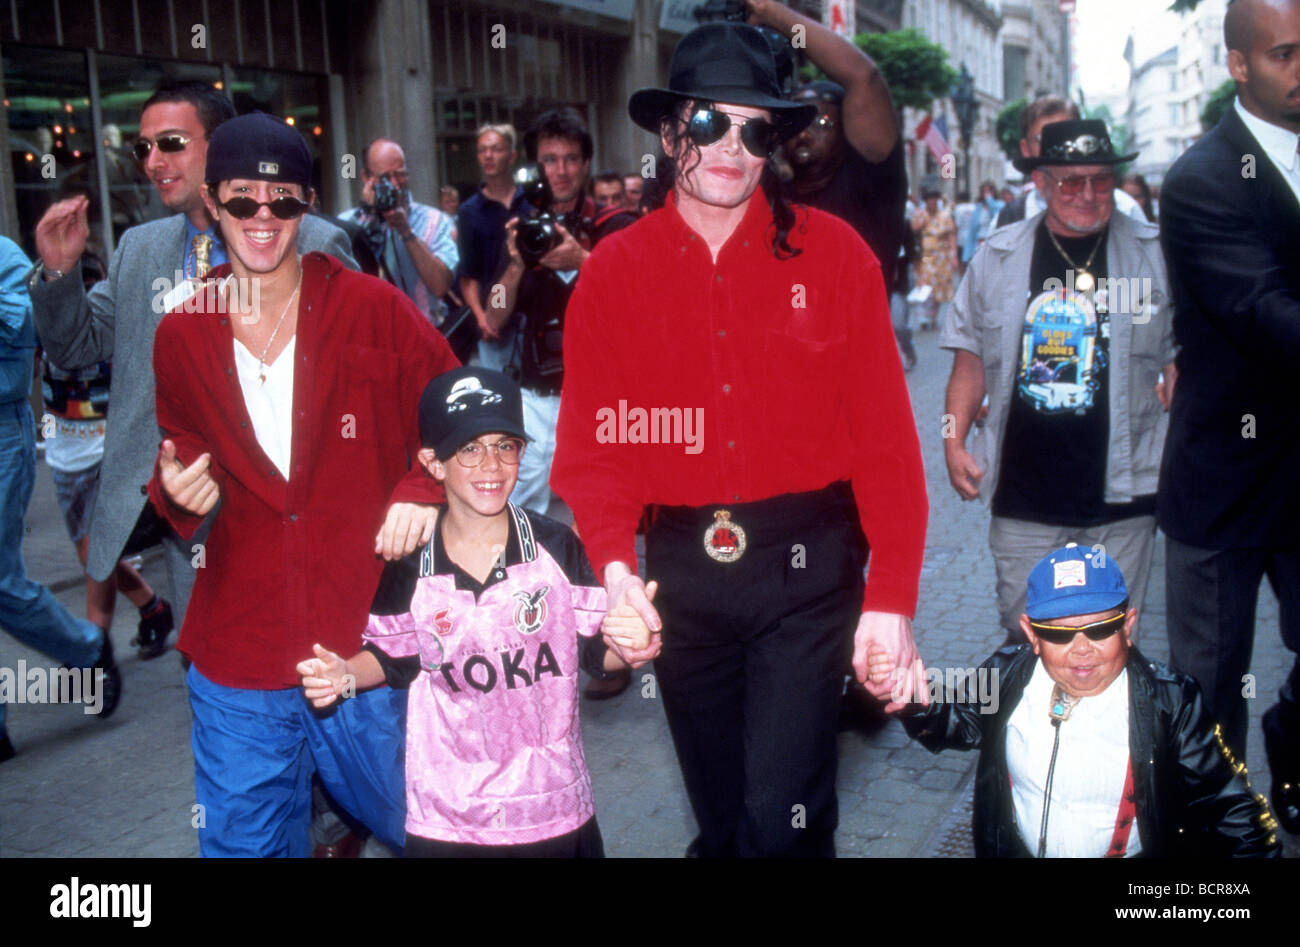 michael-jackson-with-orphans-in-budapest-in-1996-BCR8XA.jpg